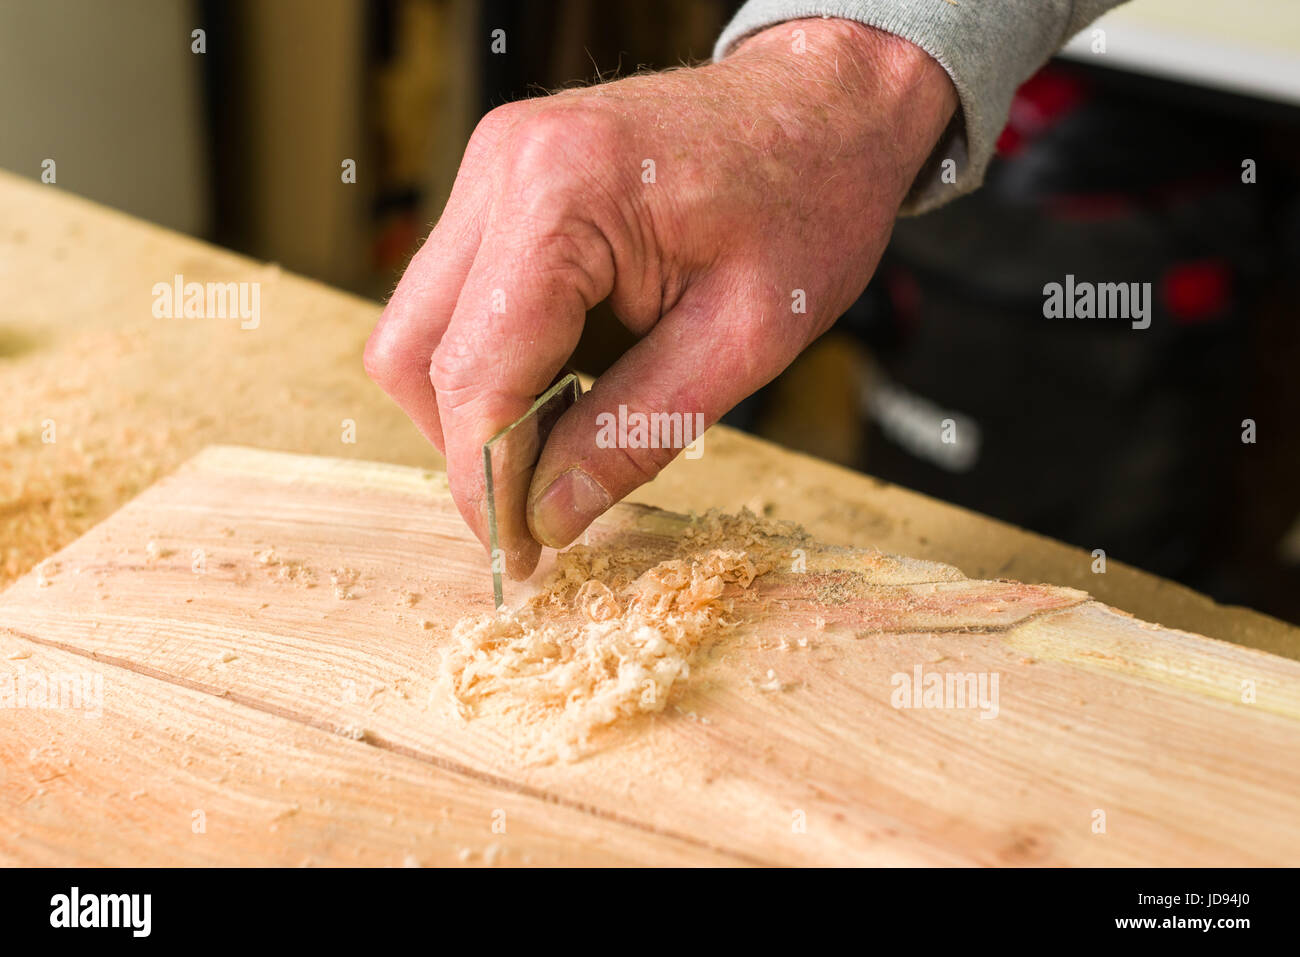 Woodworker Smoothing Wood With Glass In Workshop Stock Photo